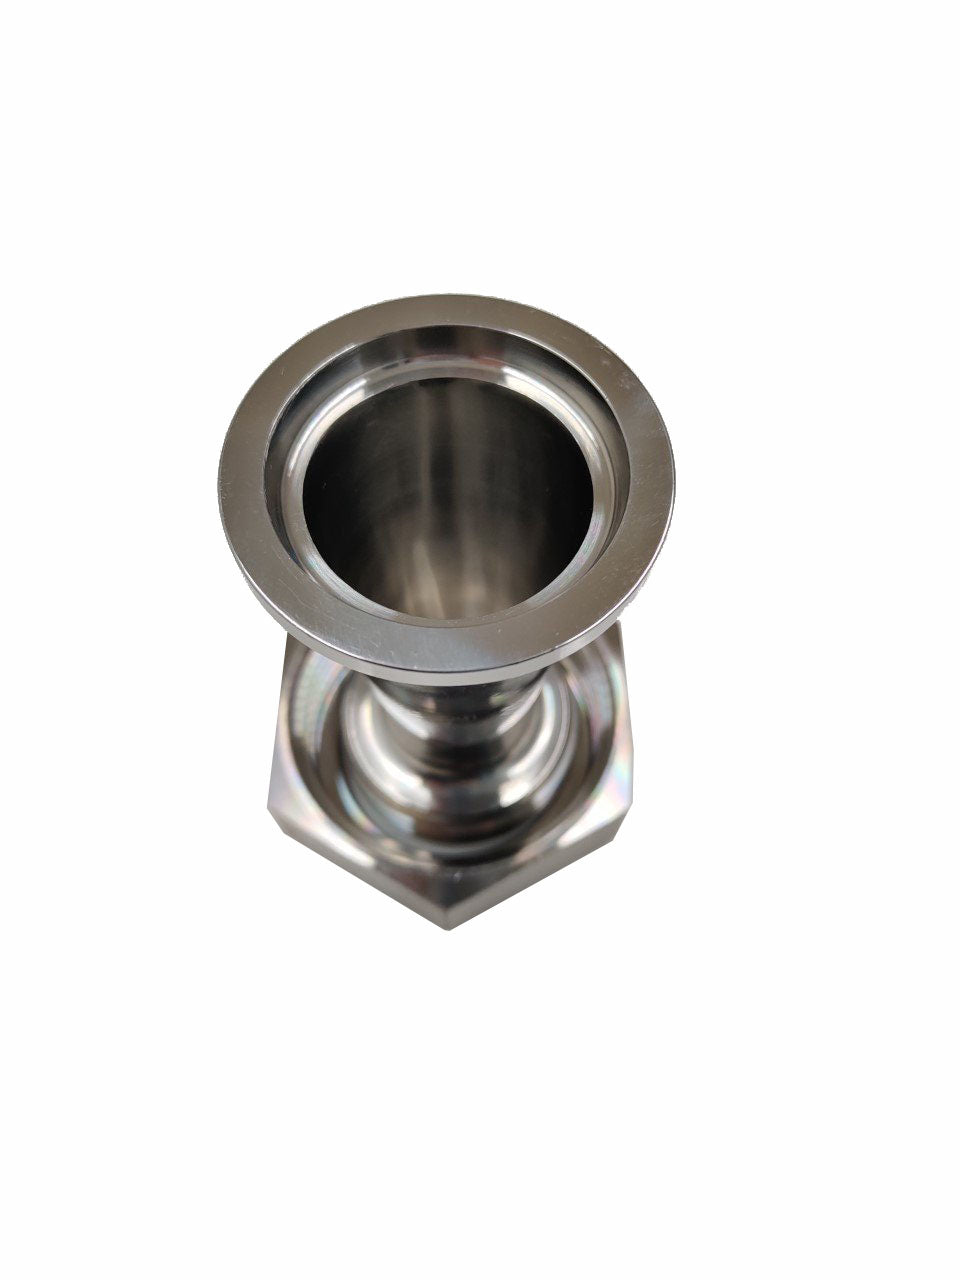 1.1/2" RJT Female to 1" RJT Male Reducer - AircoProducts